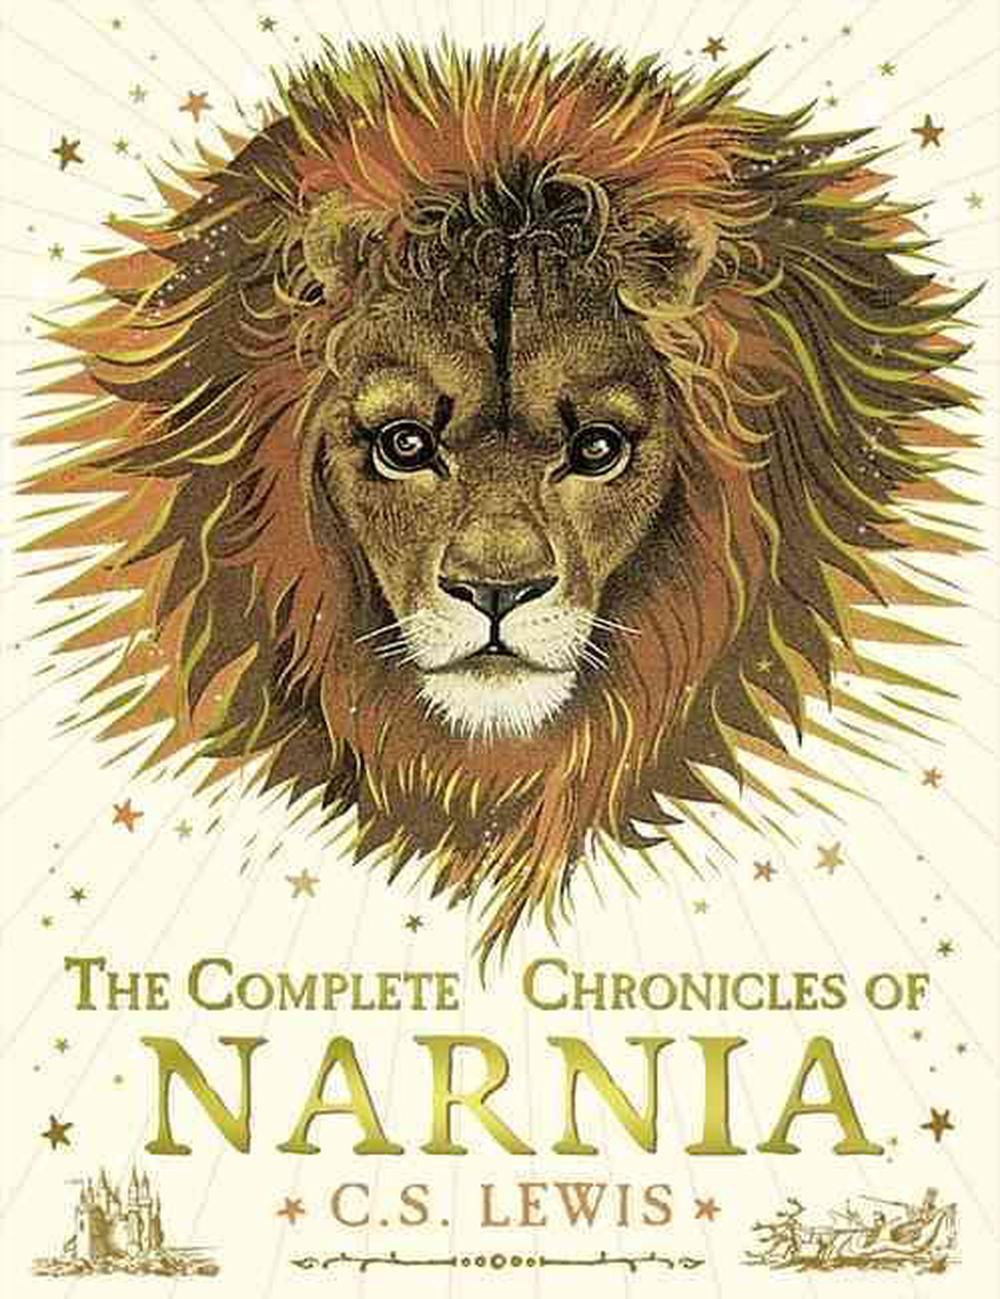 Image result for complete chronicles of narnia"